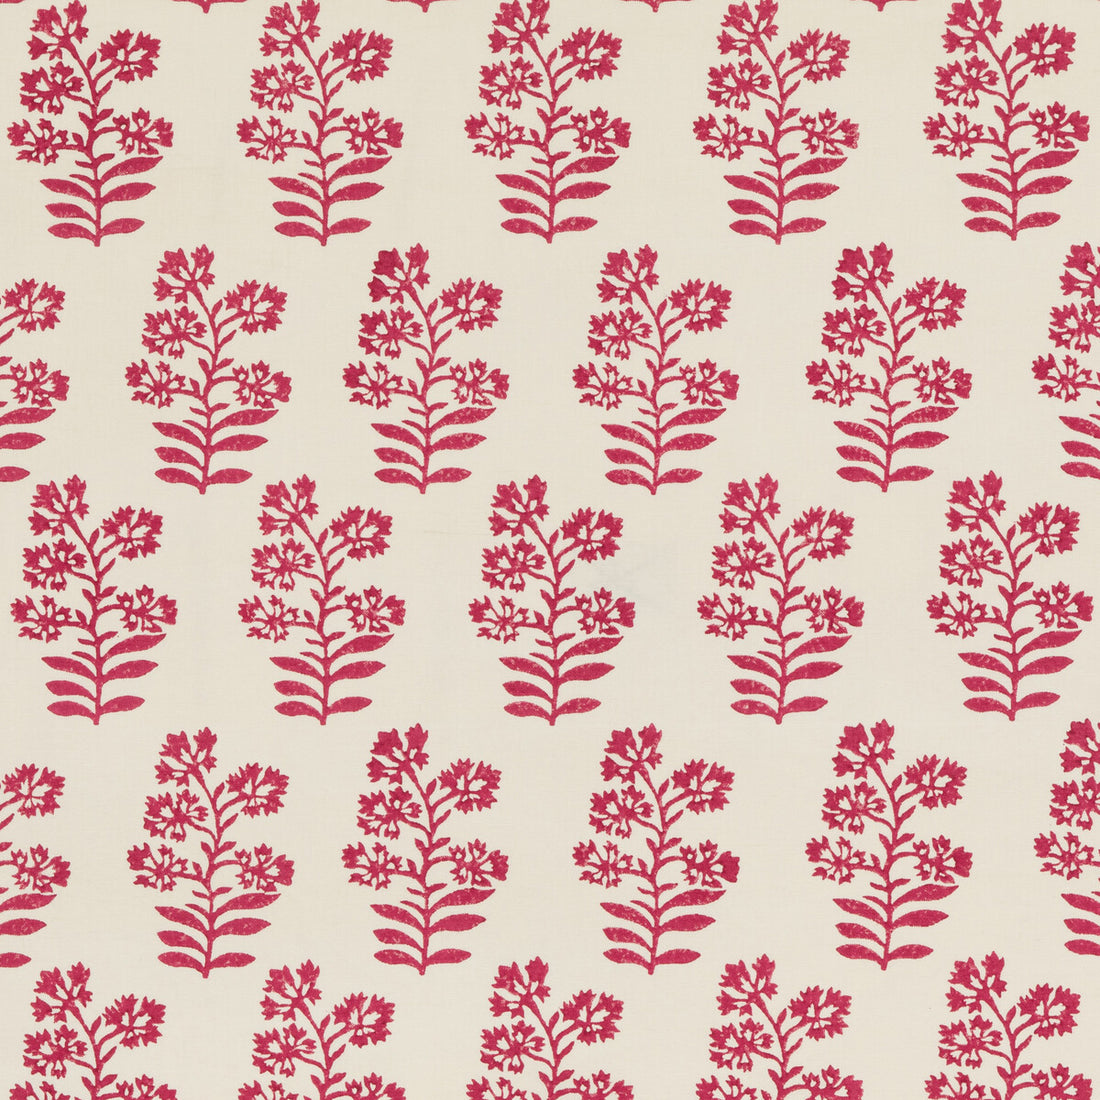 Wild Flower fabric in fuchsia color - pattern PP50483.6.0 - by Baker Lifestyle in the Block Party collection